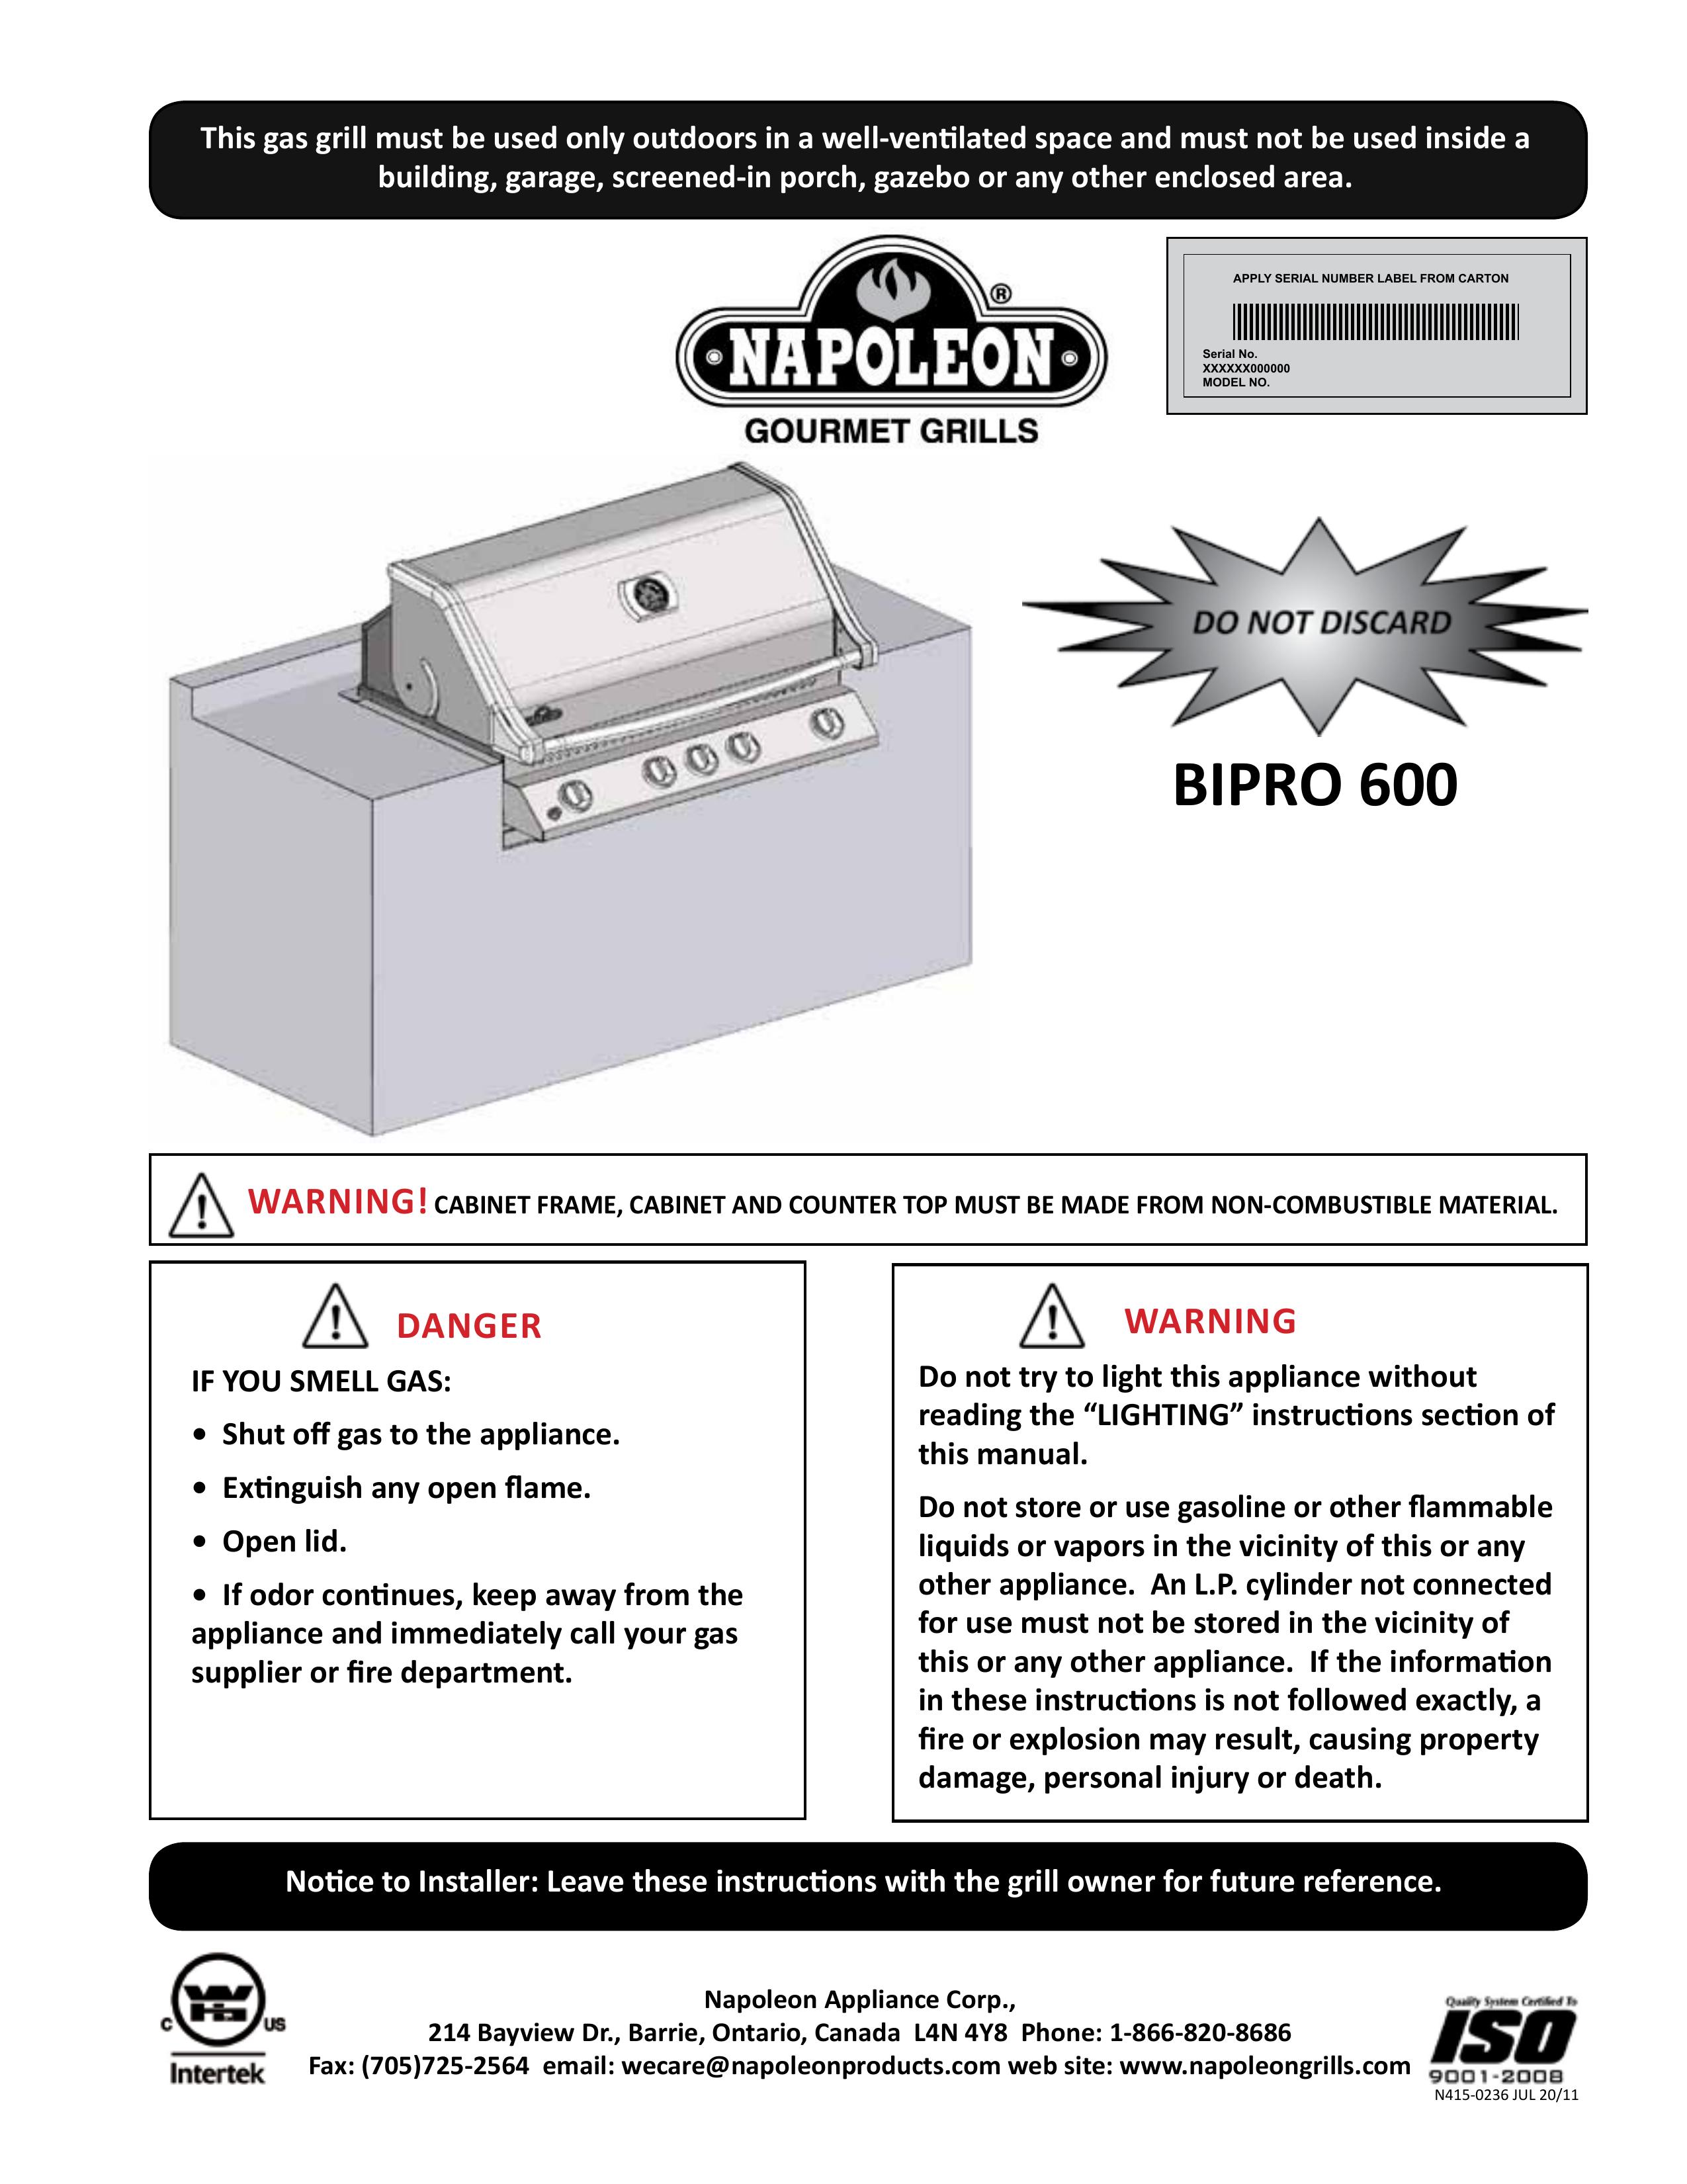 Napoleon Grills BIPRO 600 Charcoal Grill User Manual